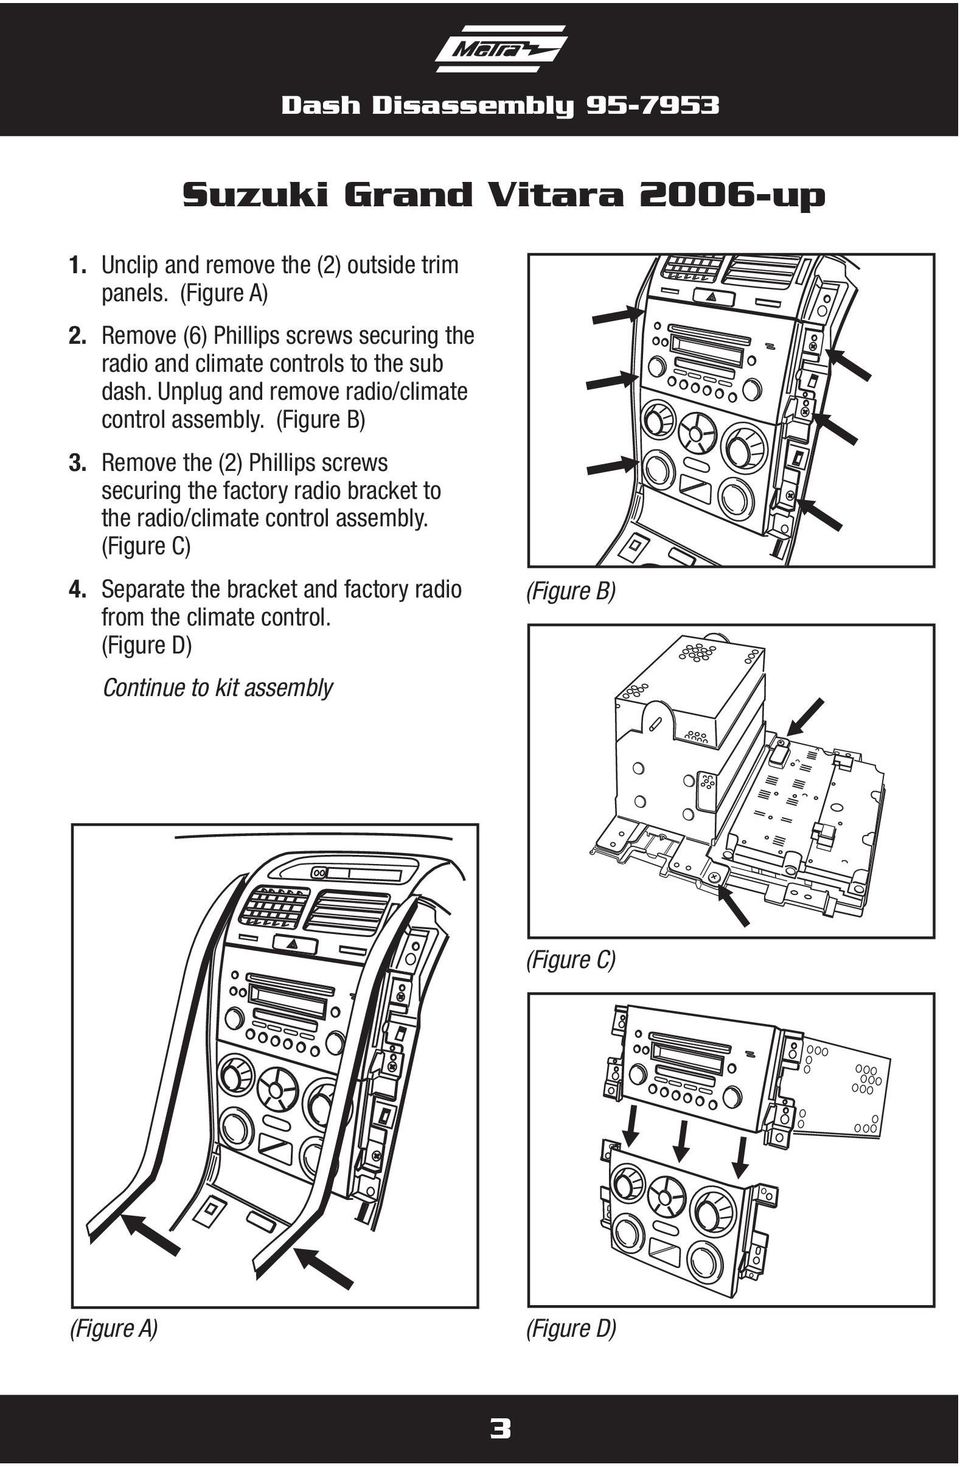 (Figure B) 3. Remove the (2) Phillips screws securing the factory radio bracket to the radio/climate control assembly. (Figure C) 4.